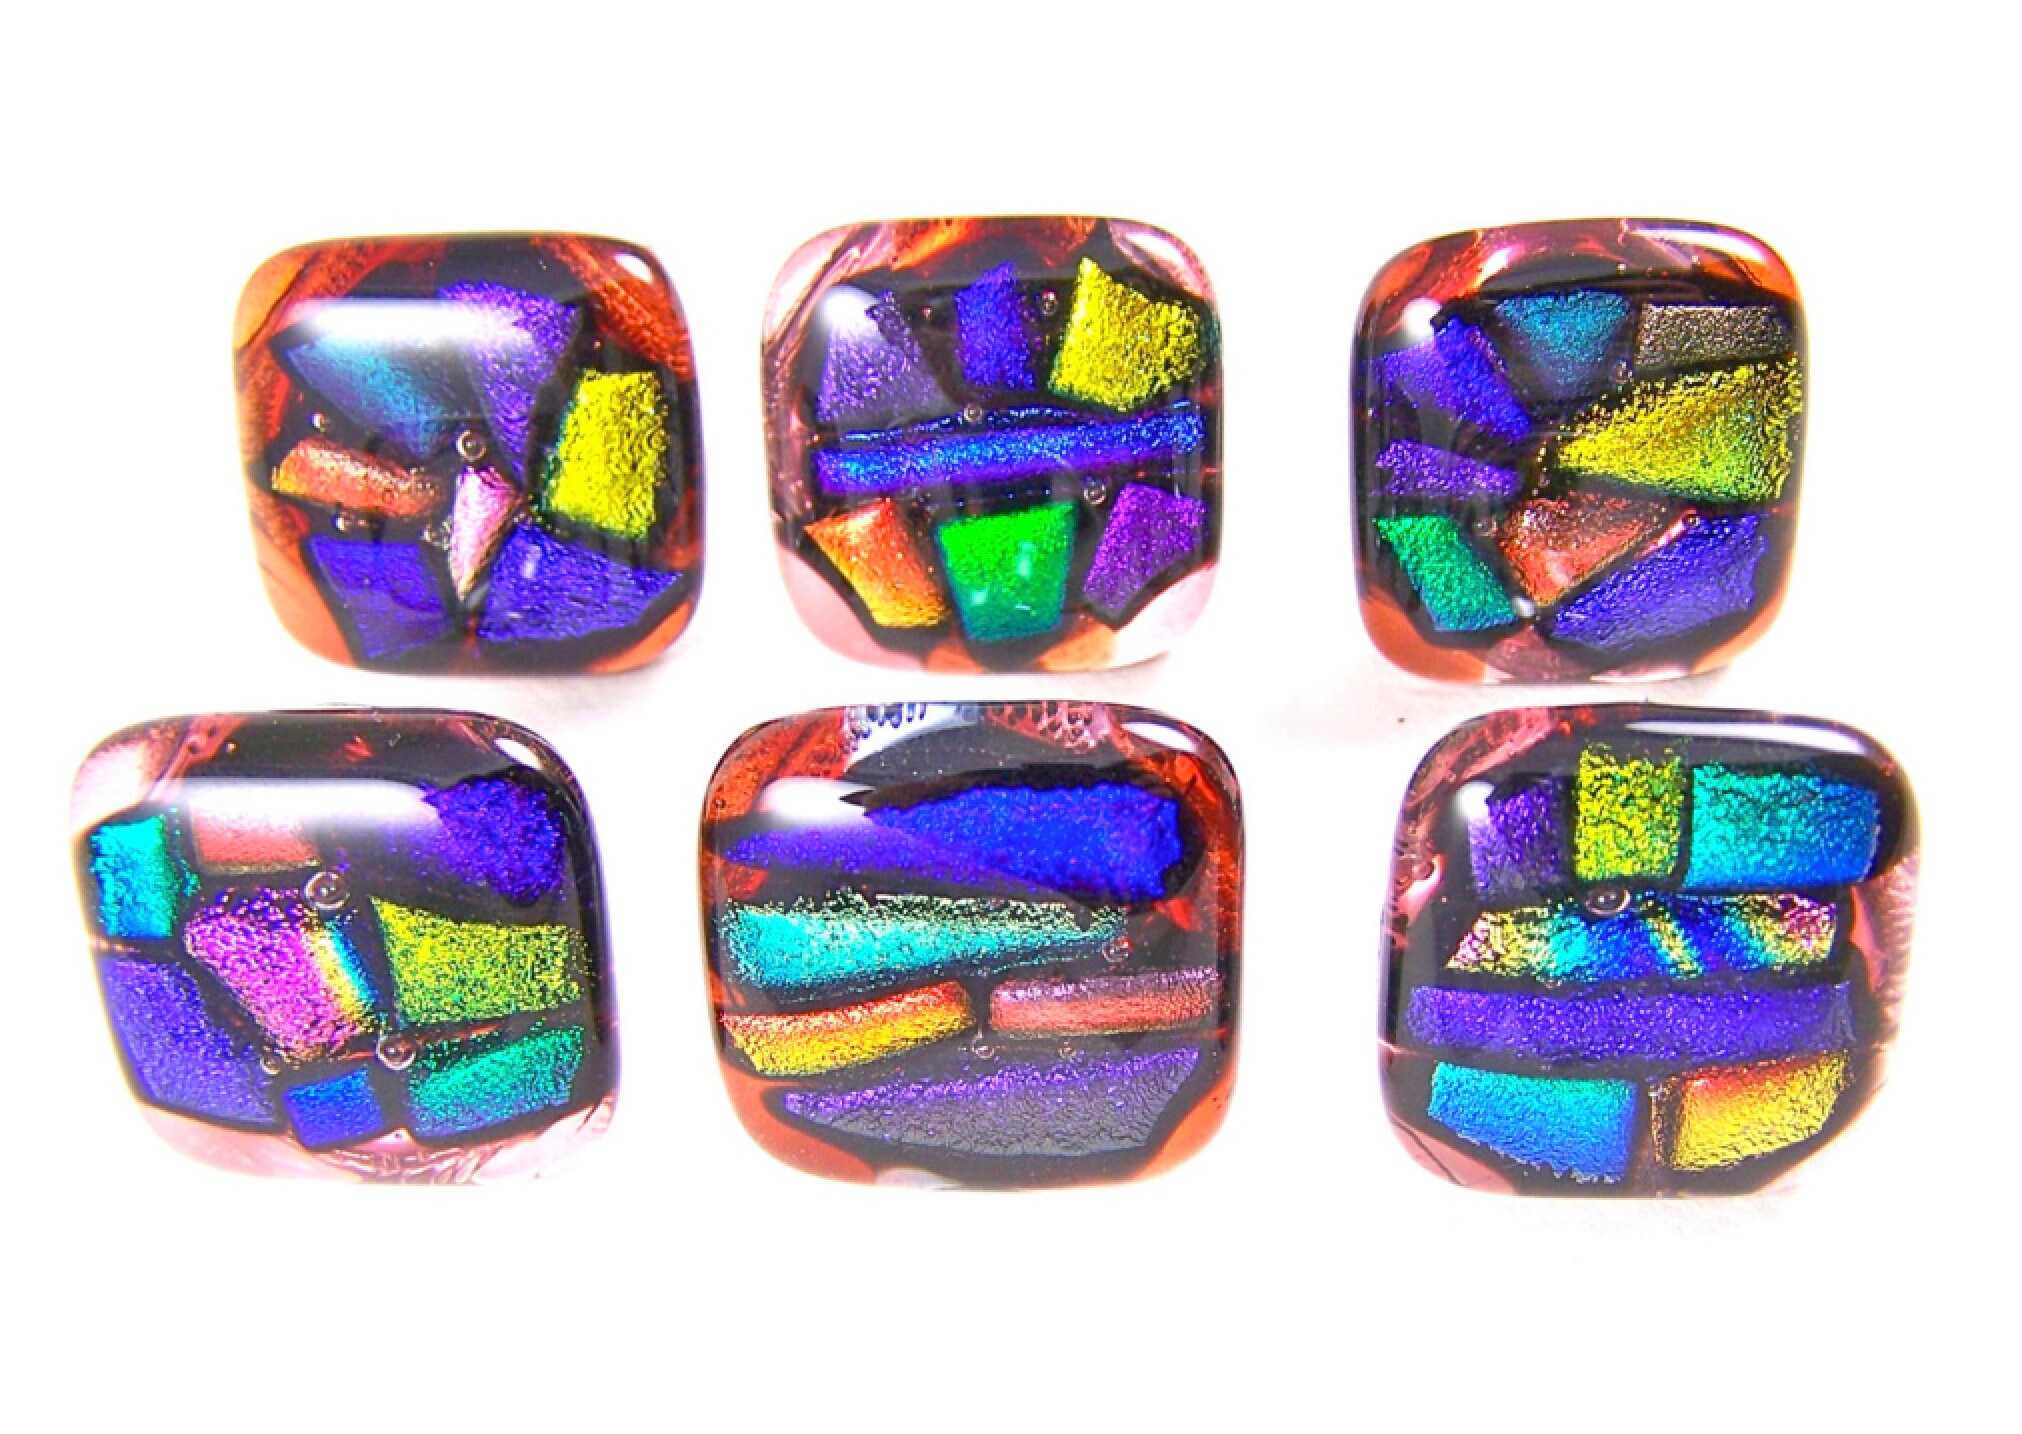 Rainbow Red Pink Orange Cobalt Blue Purple Green Smooth Shards Fused Glass Dichroic Glass Knobs Custom Made Abstract Confetti Mosaic Cabinet or Drawer Pull Handle 1 / 30mm 